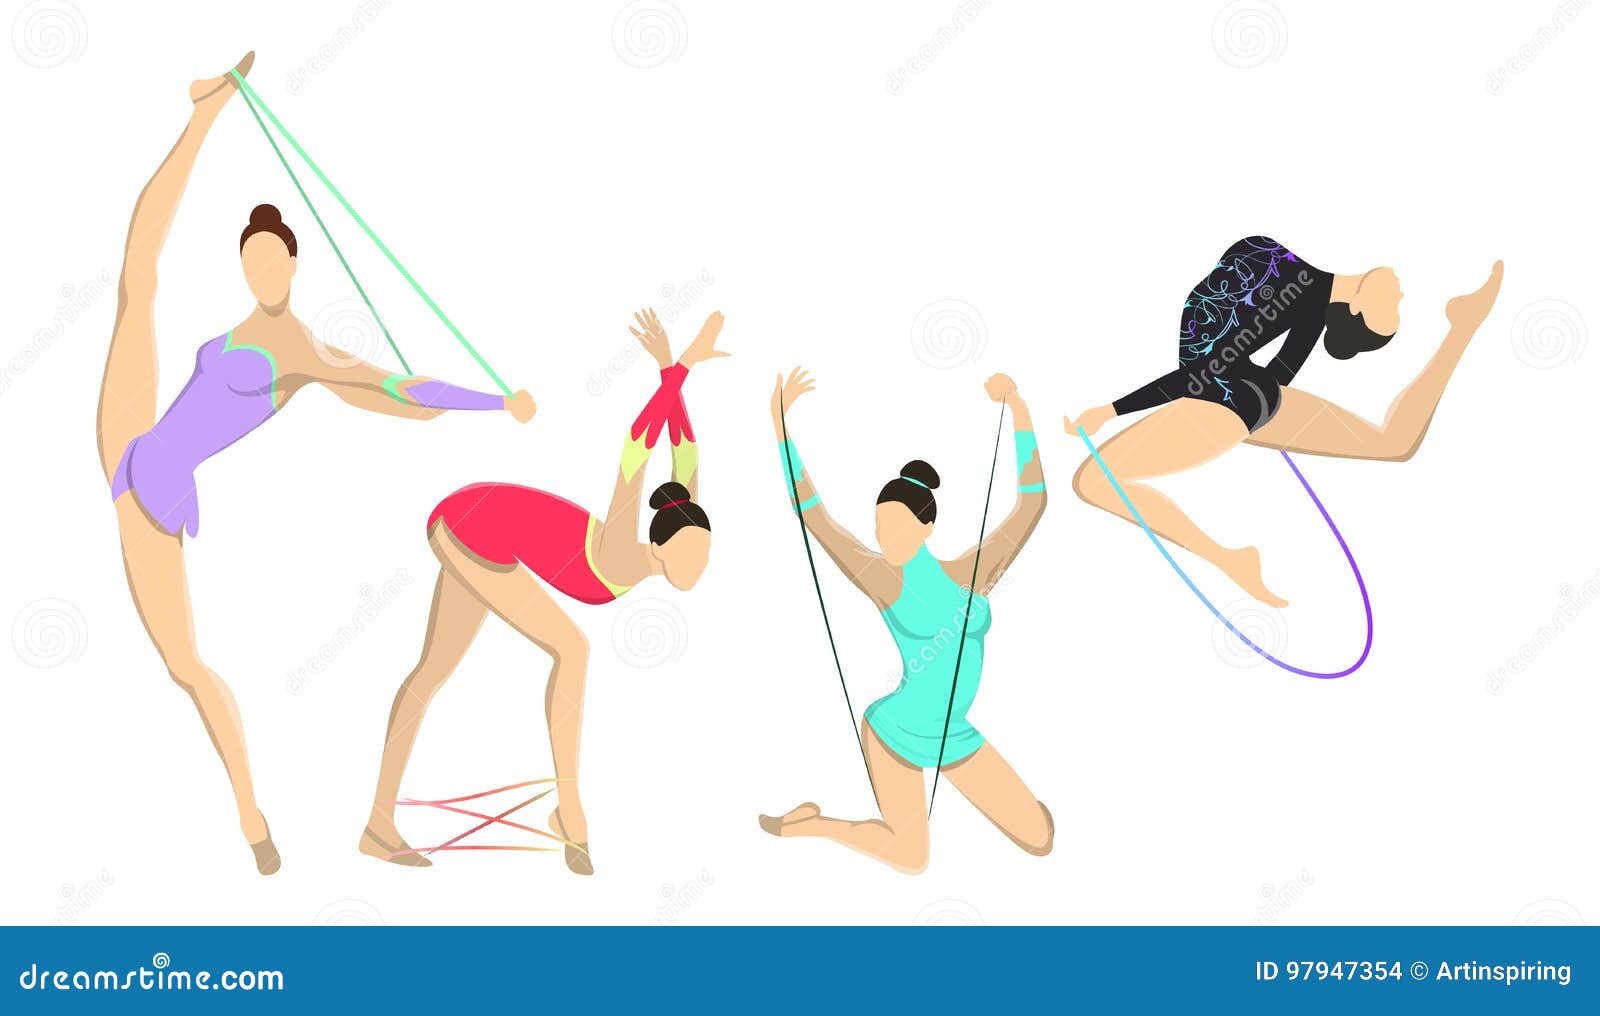 https://thumbs.dreamstime.com/z/gymnastics-jumping-rope-women-outfit-ropes-white-background-97947354.jpg